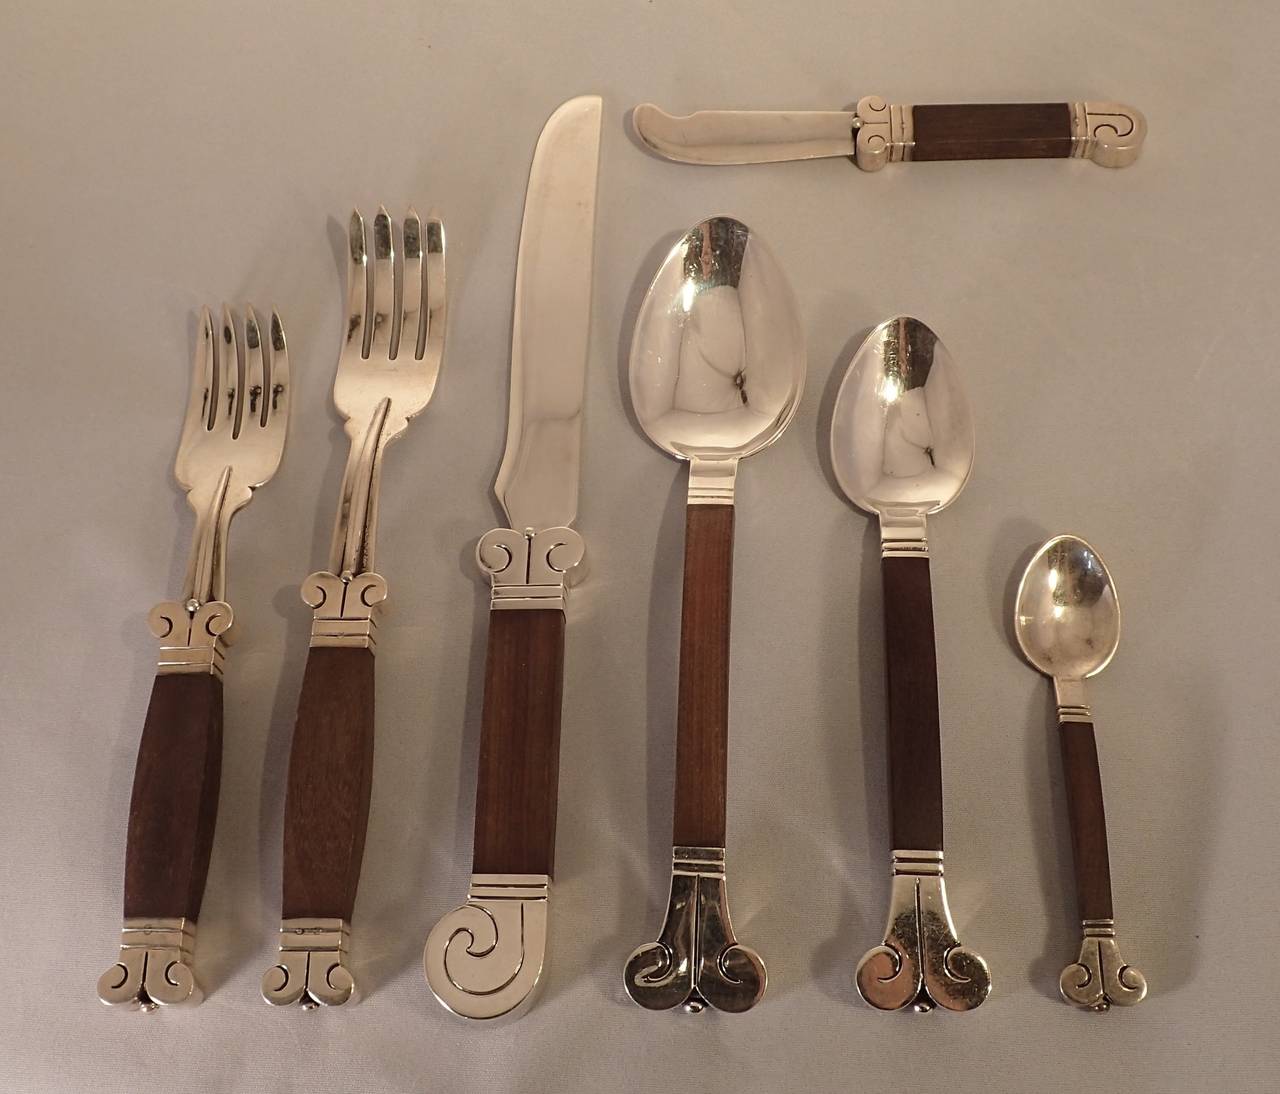 A rare and spectacularly designed and executed set of hand-wrought and carved silver and rosewood Aztec pattern flatware by Hector Aguilar. Comprised of four place settings, with seven pieces per place setting, each setting containing a salad fork,